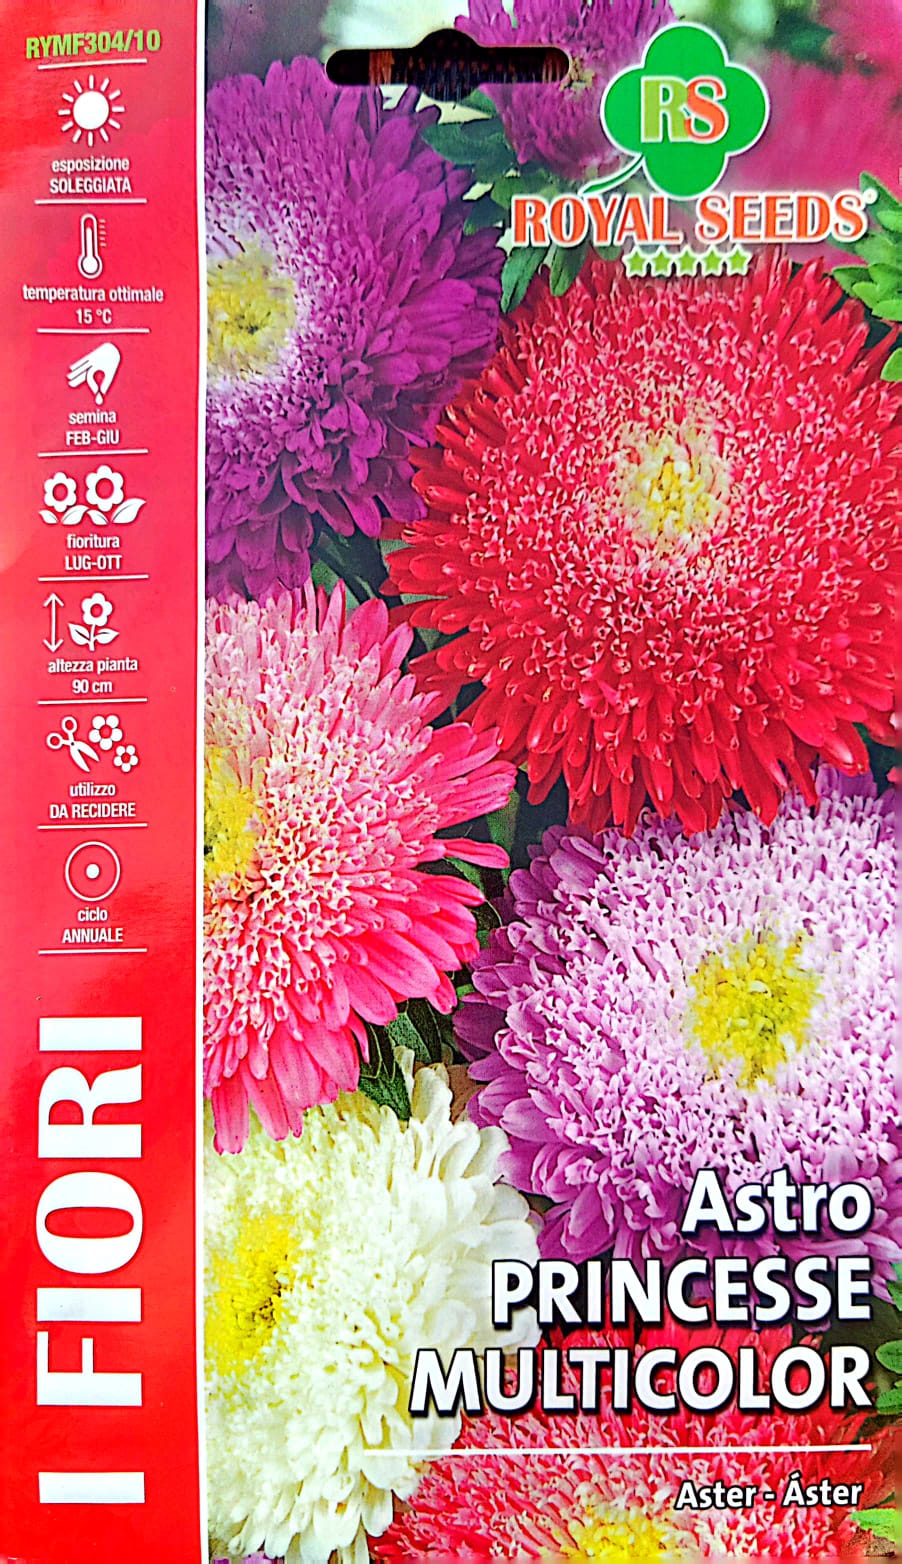 Royal Double Aster RYMF304/10